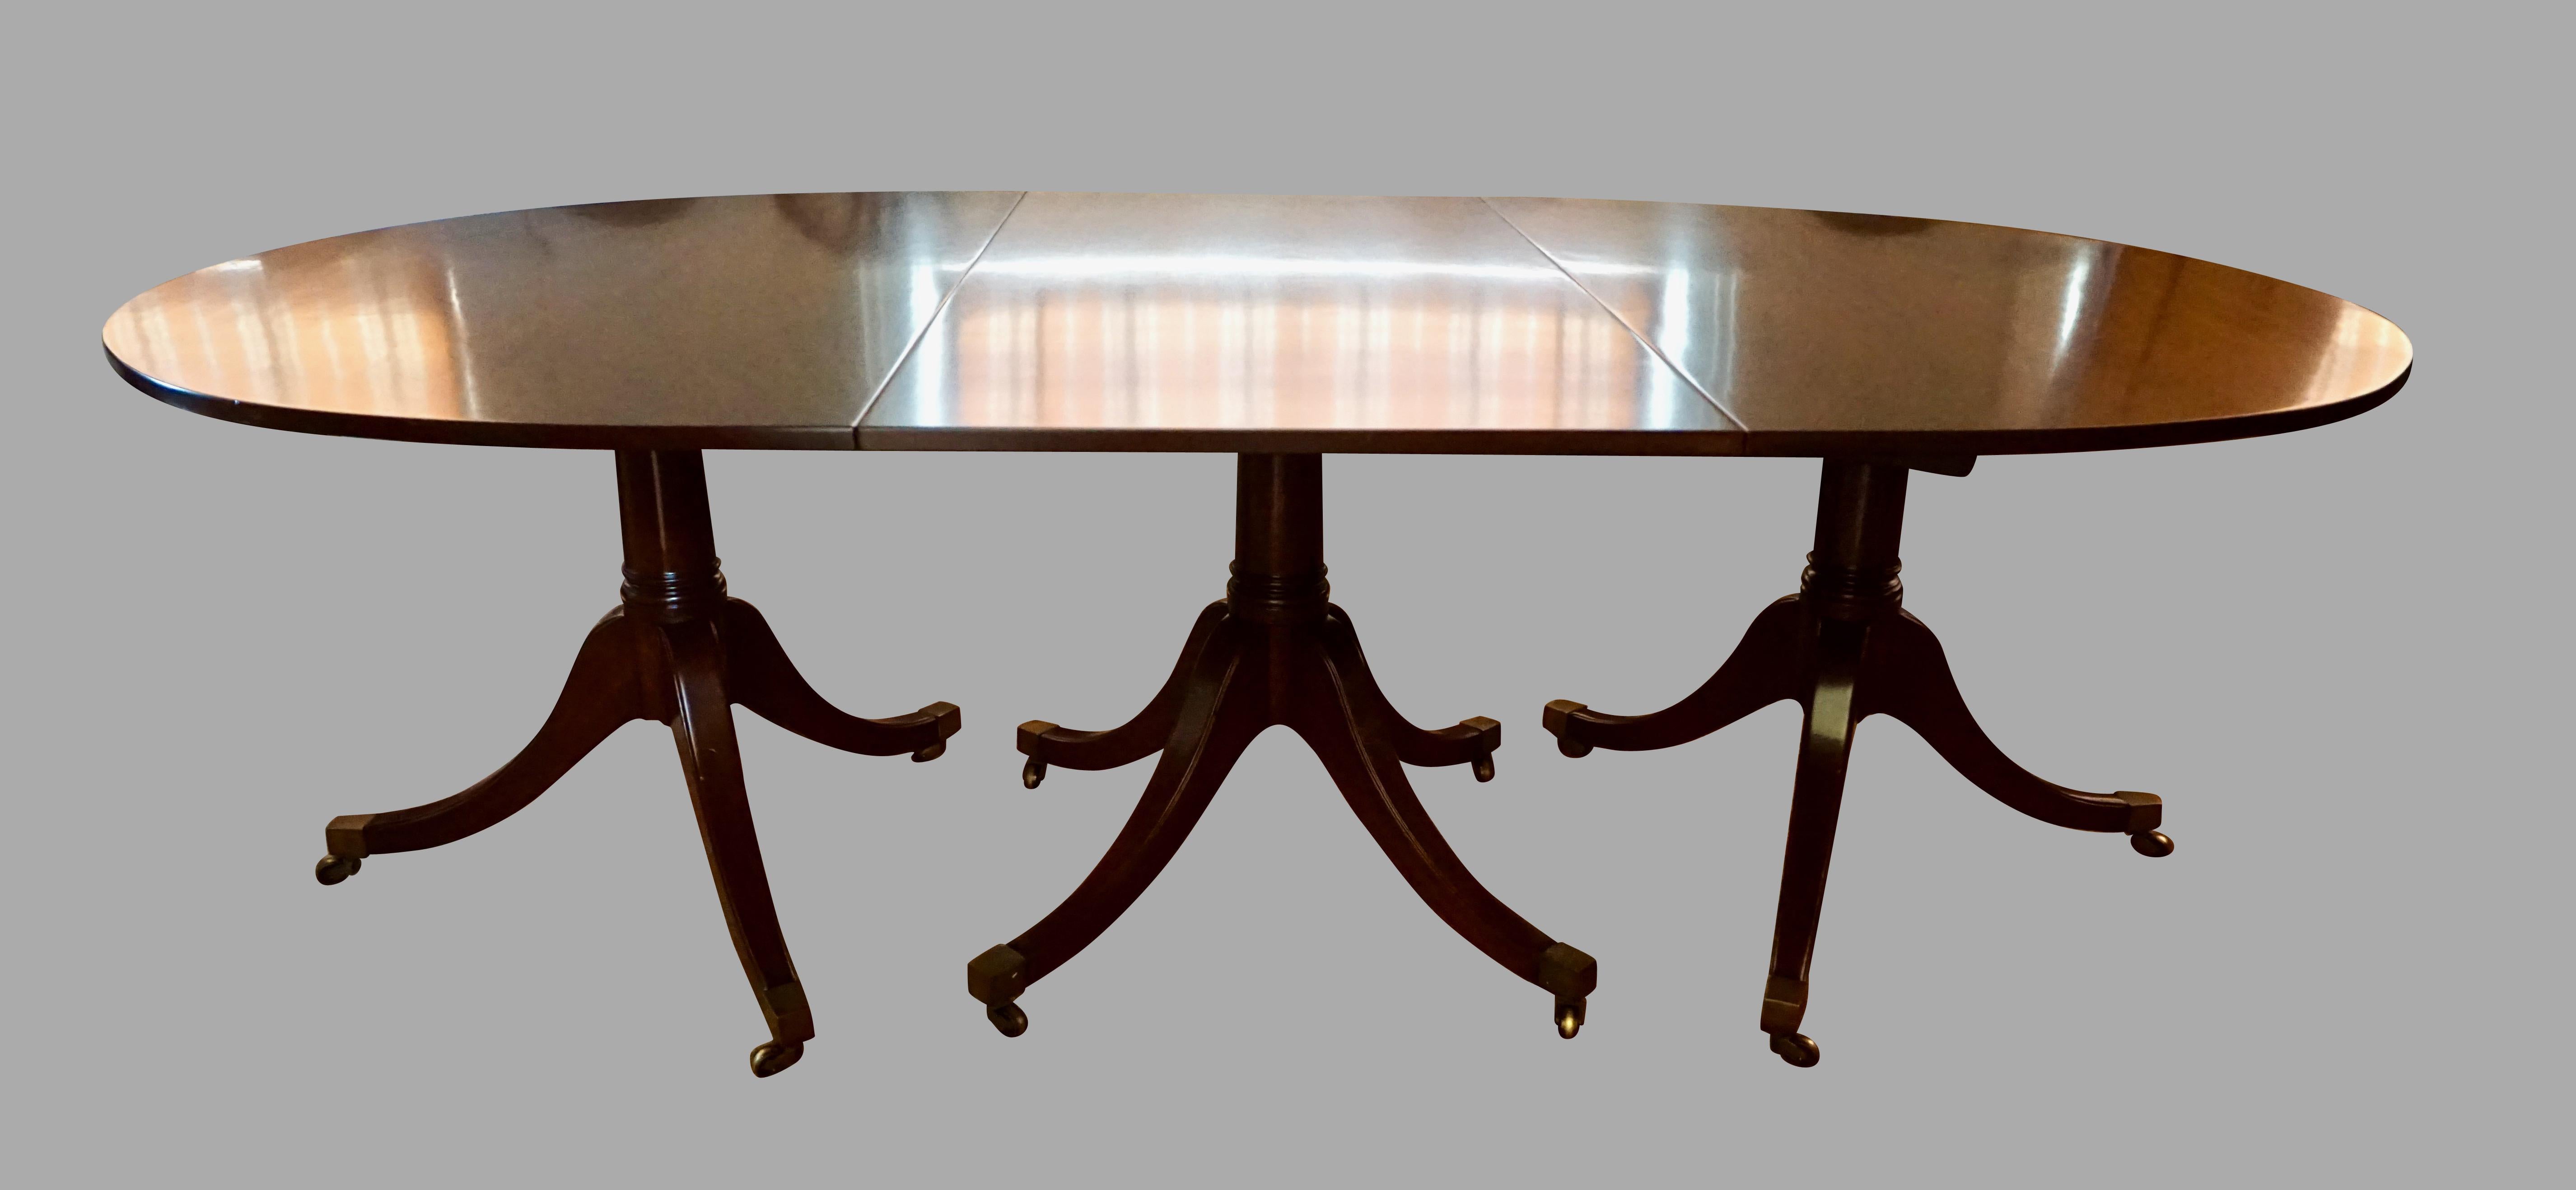 Brass English 3 Pedestal Georgian Style Dining Table with 2 Original Leaves